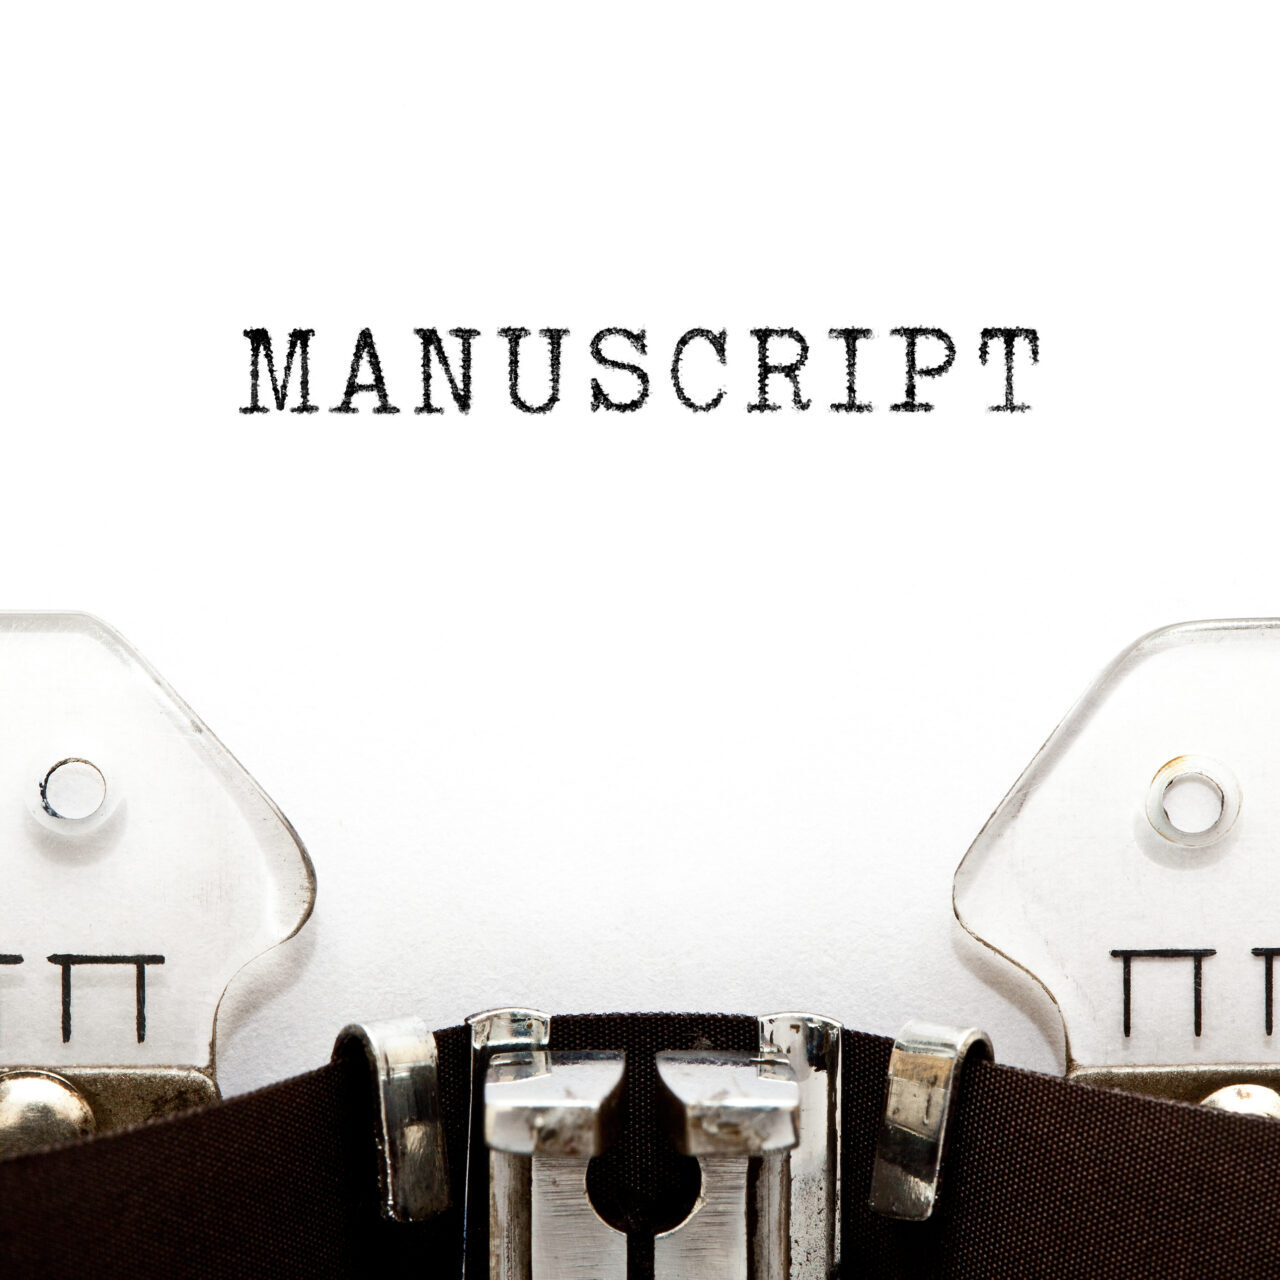 The word Manuscript typed on retro typewriter with copy space.